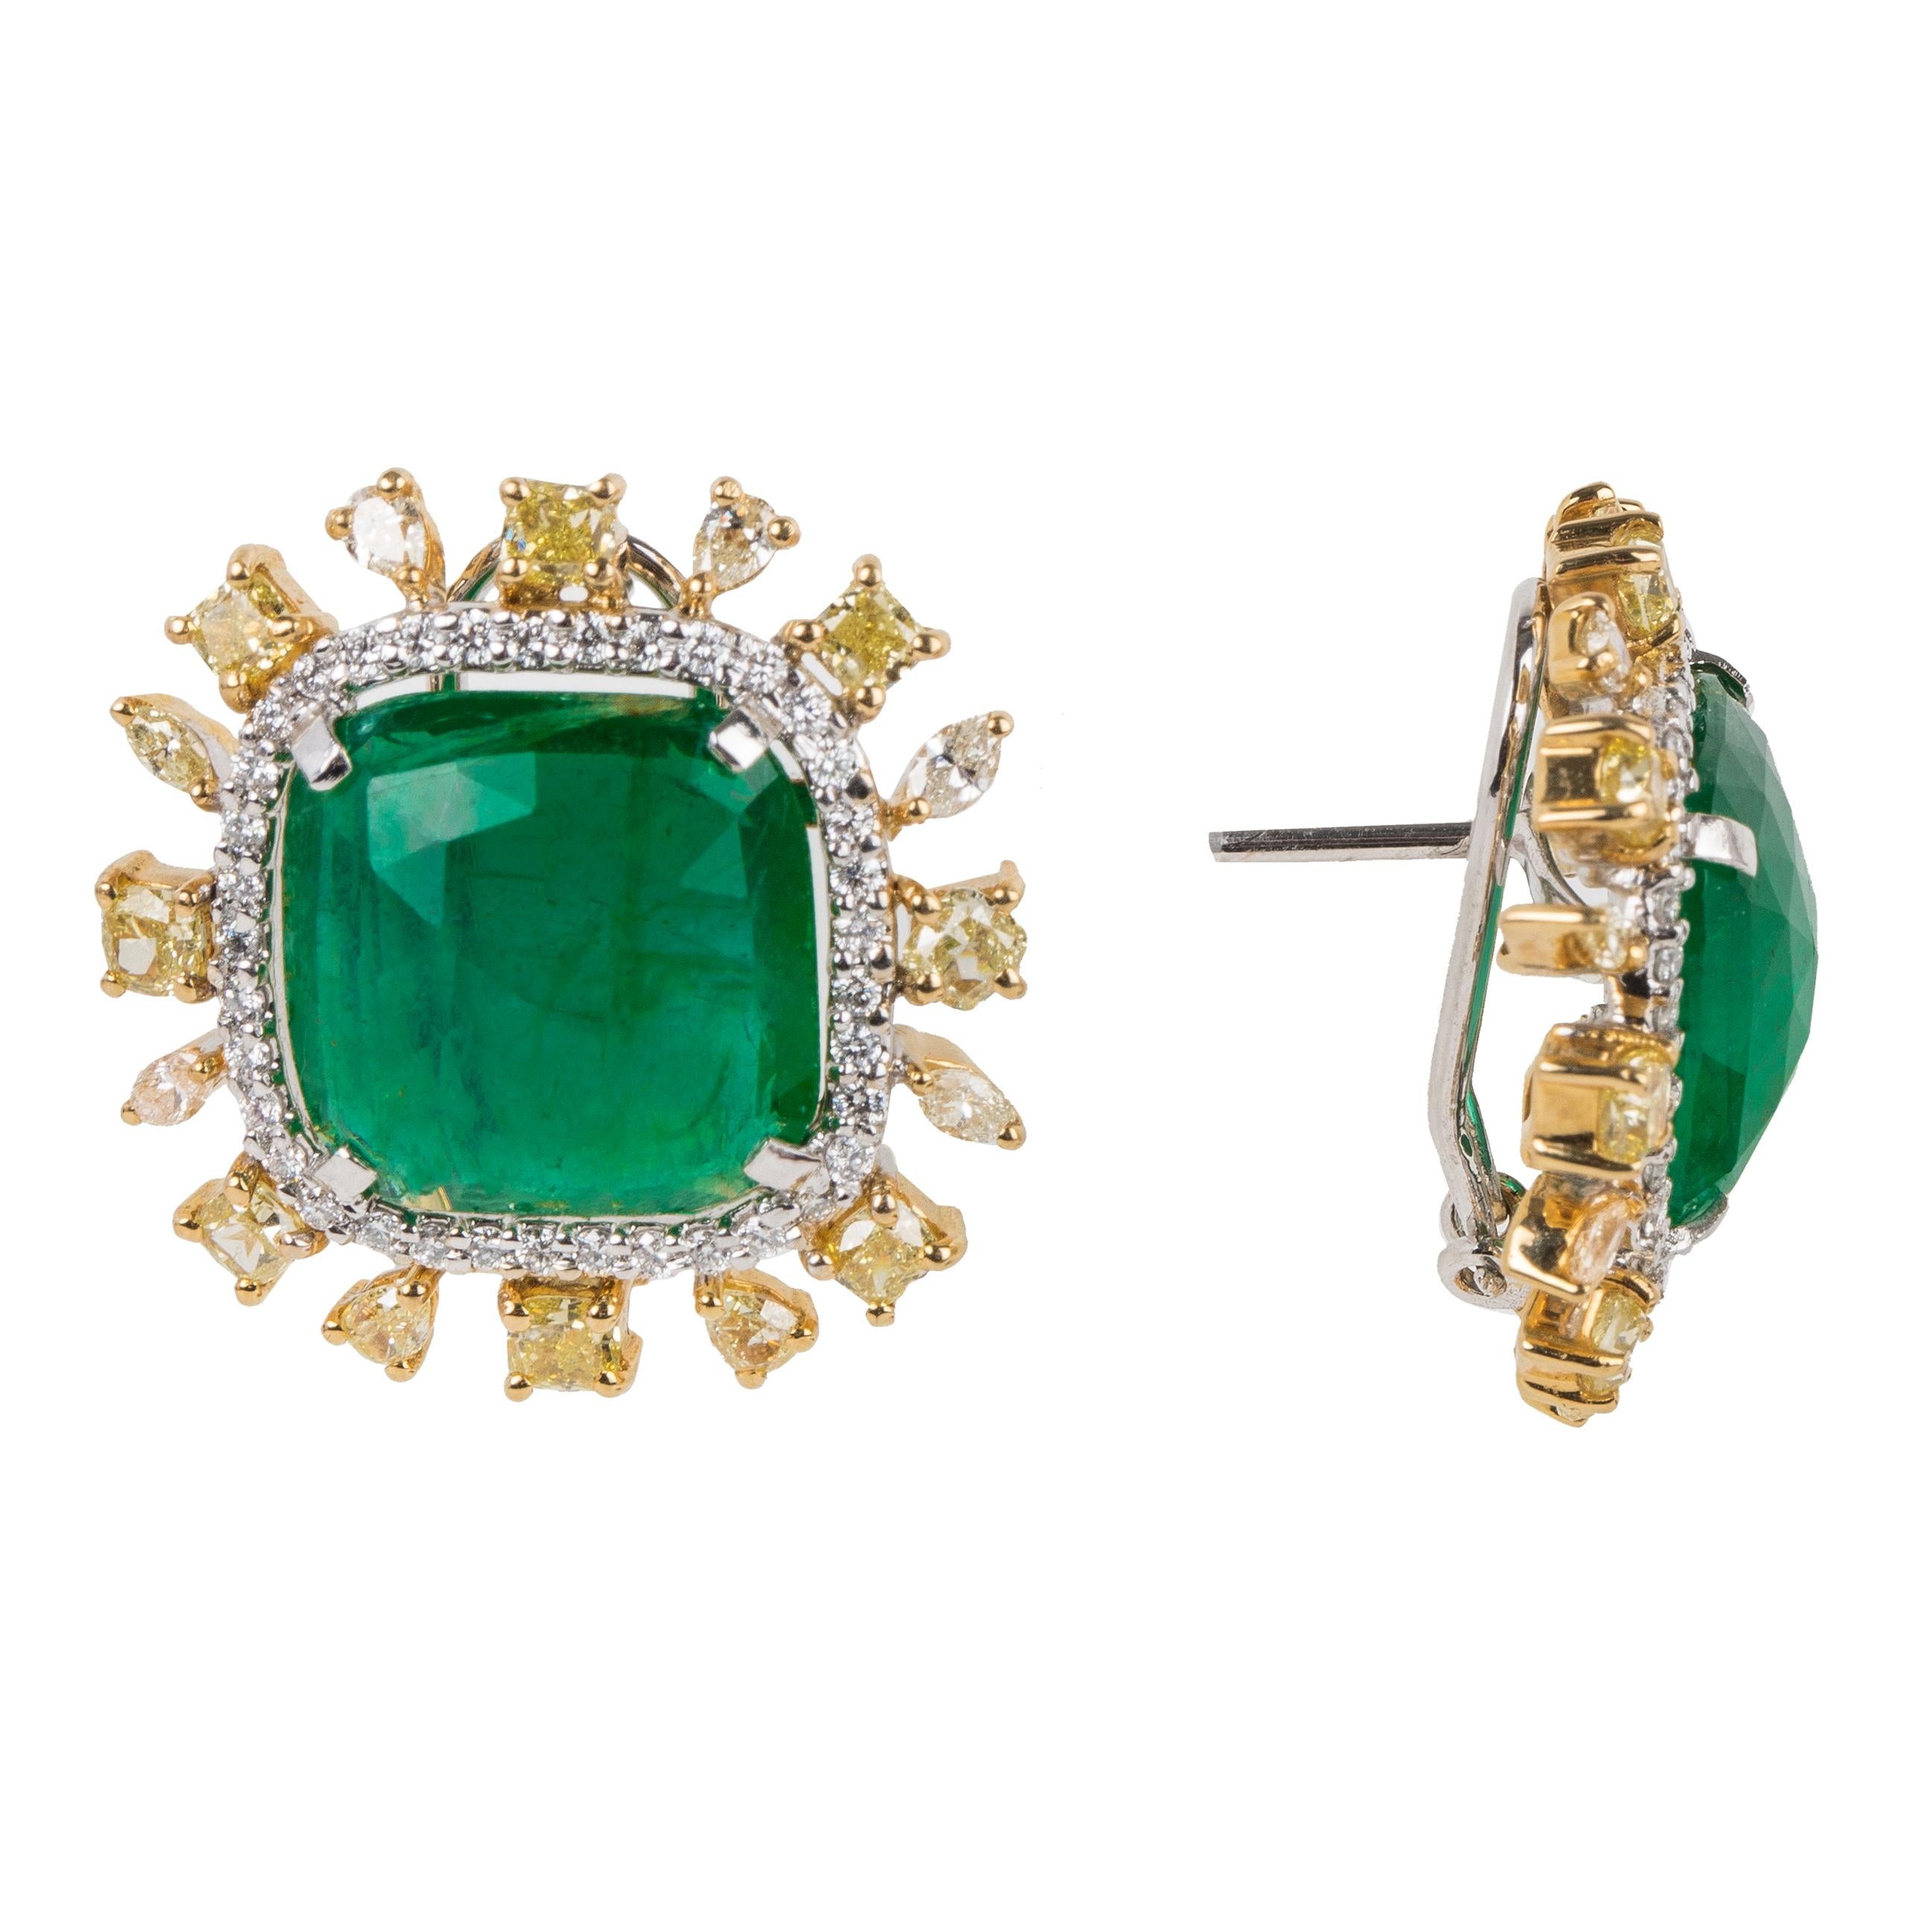 This pair of earrings features a unique emerald checkerboard cut in a square shape. Around the gorgeous stone, is a halo of diamonds. The outside is studded with fancy color diamonds. This natural Zambian emerald is saturated with vivid green color. 